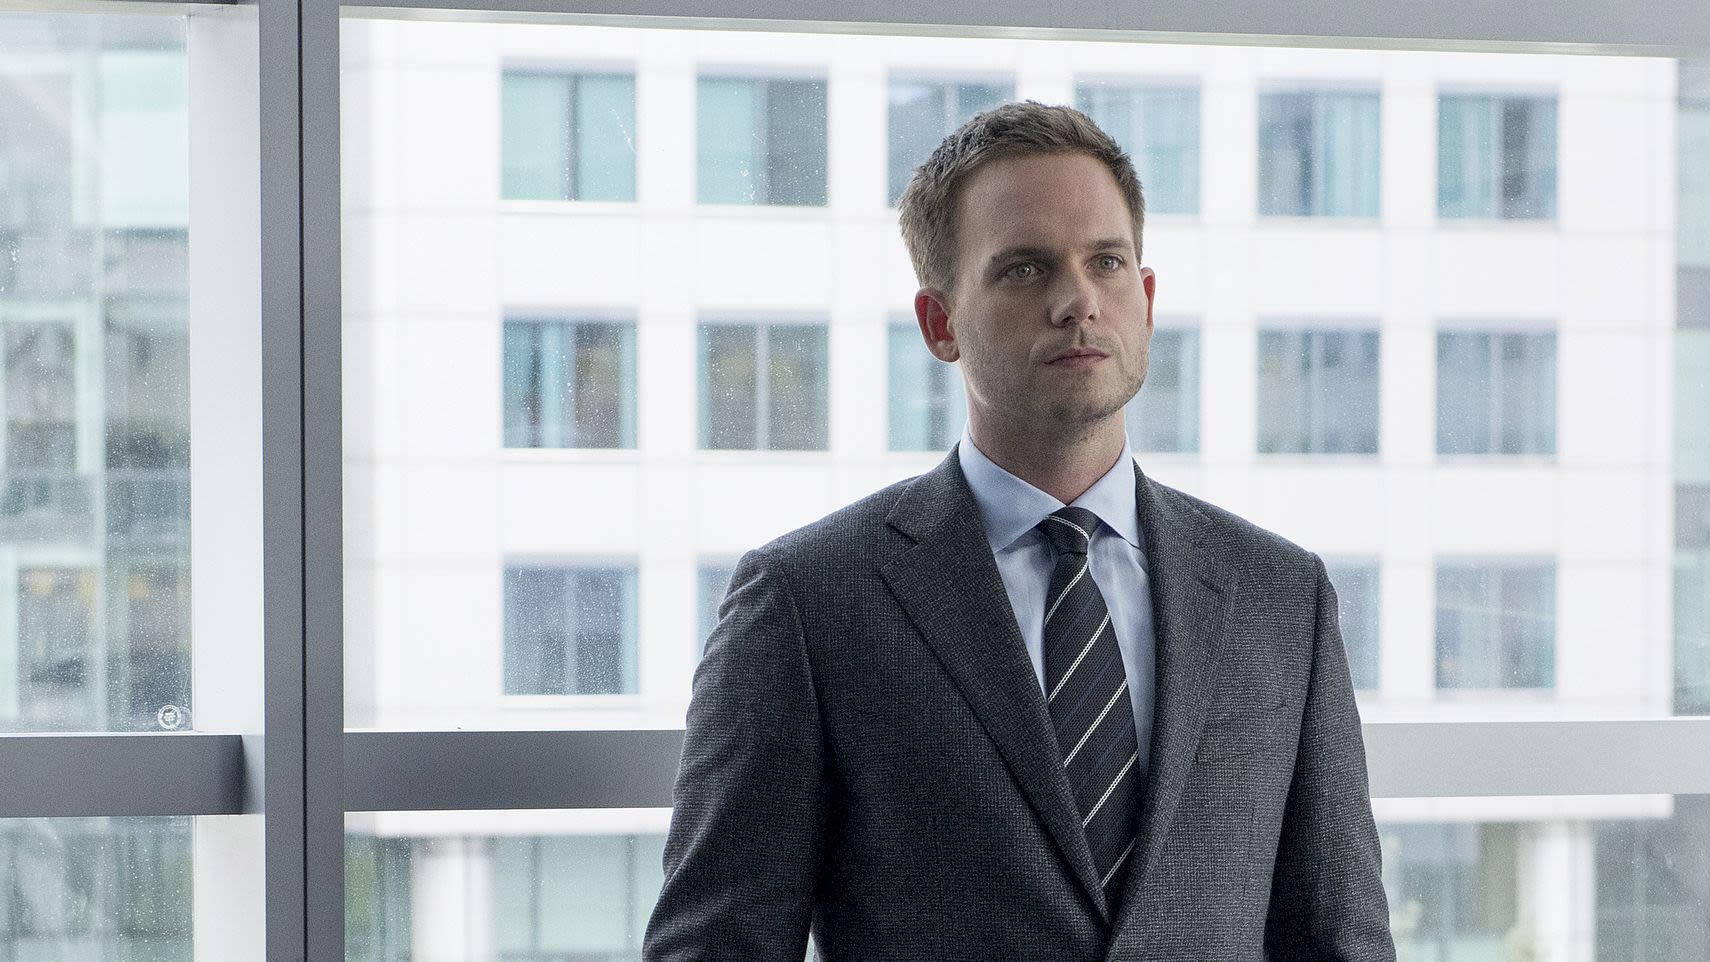 Case Closed, 'Suits' Fans — Season 9 Is Officially on Netflix